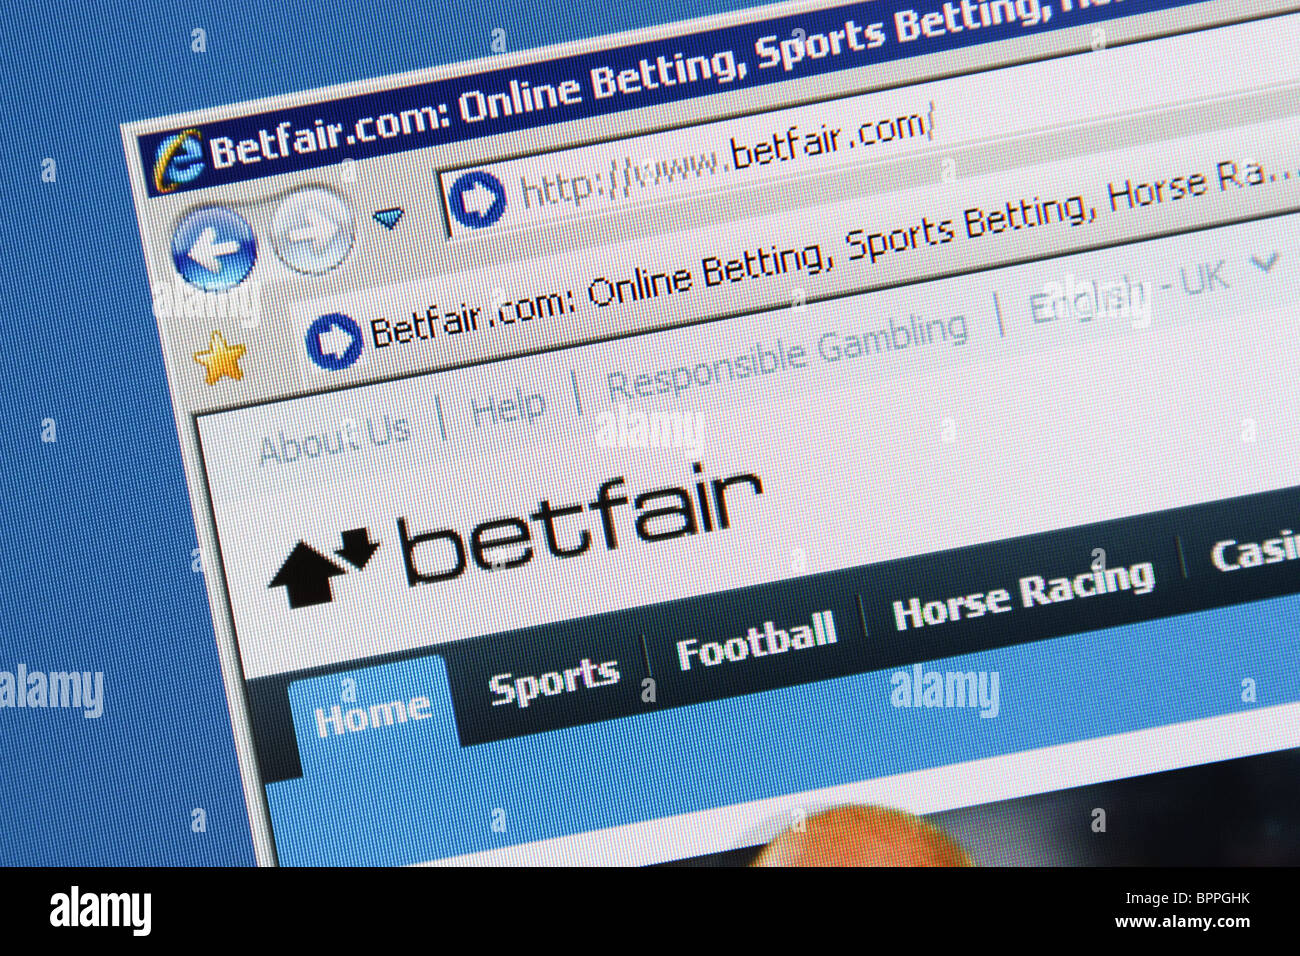 Is Dr Bet Uk casino online Making Me Rich?